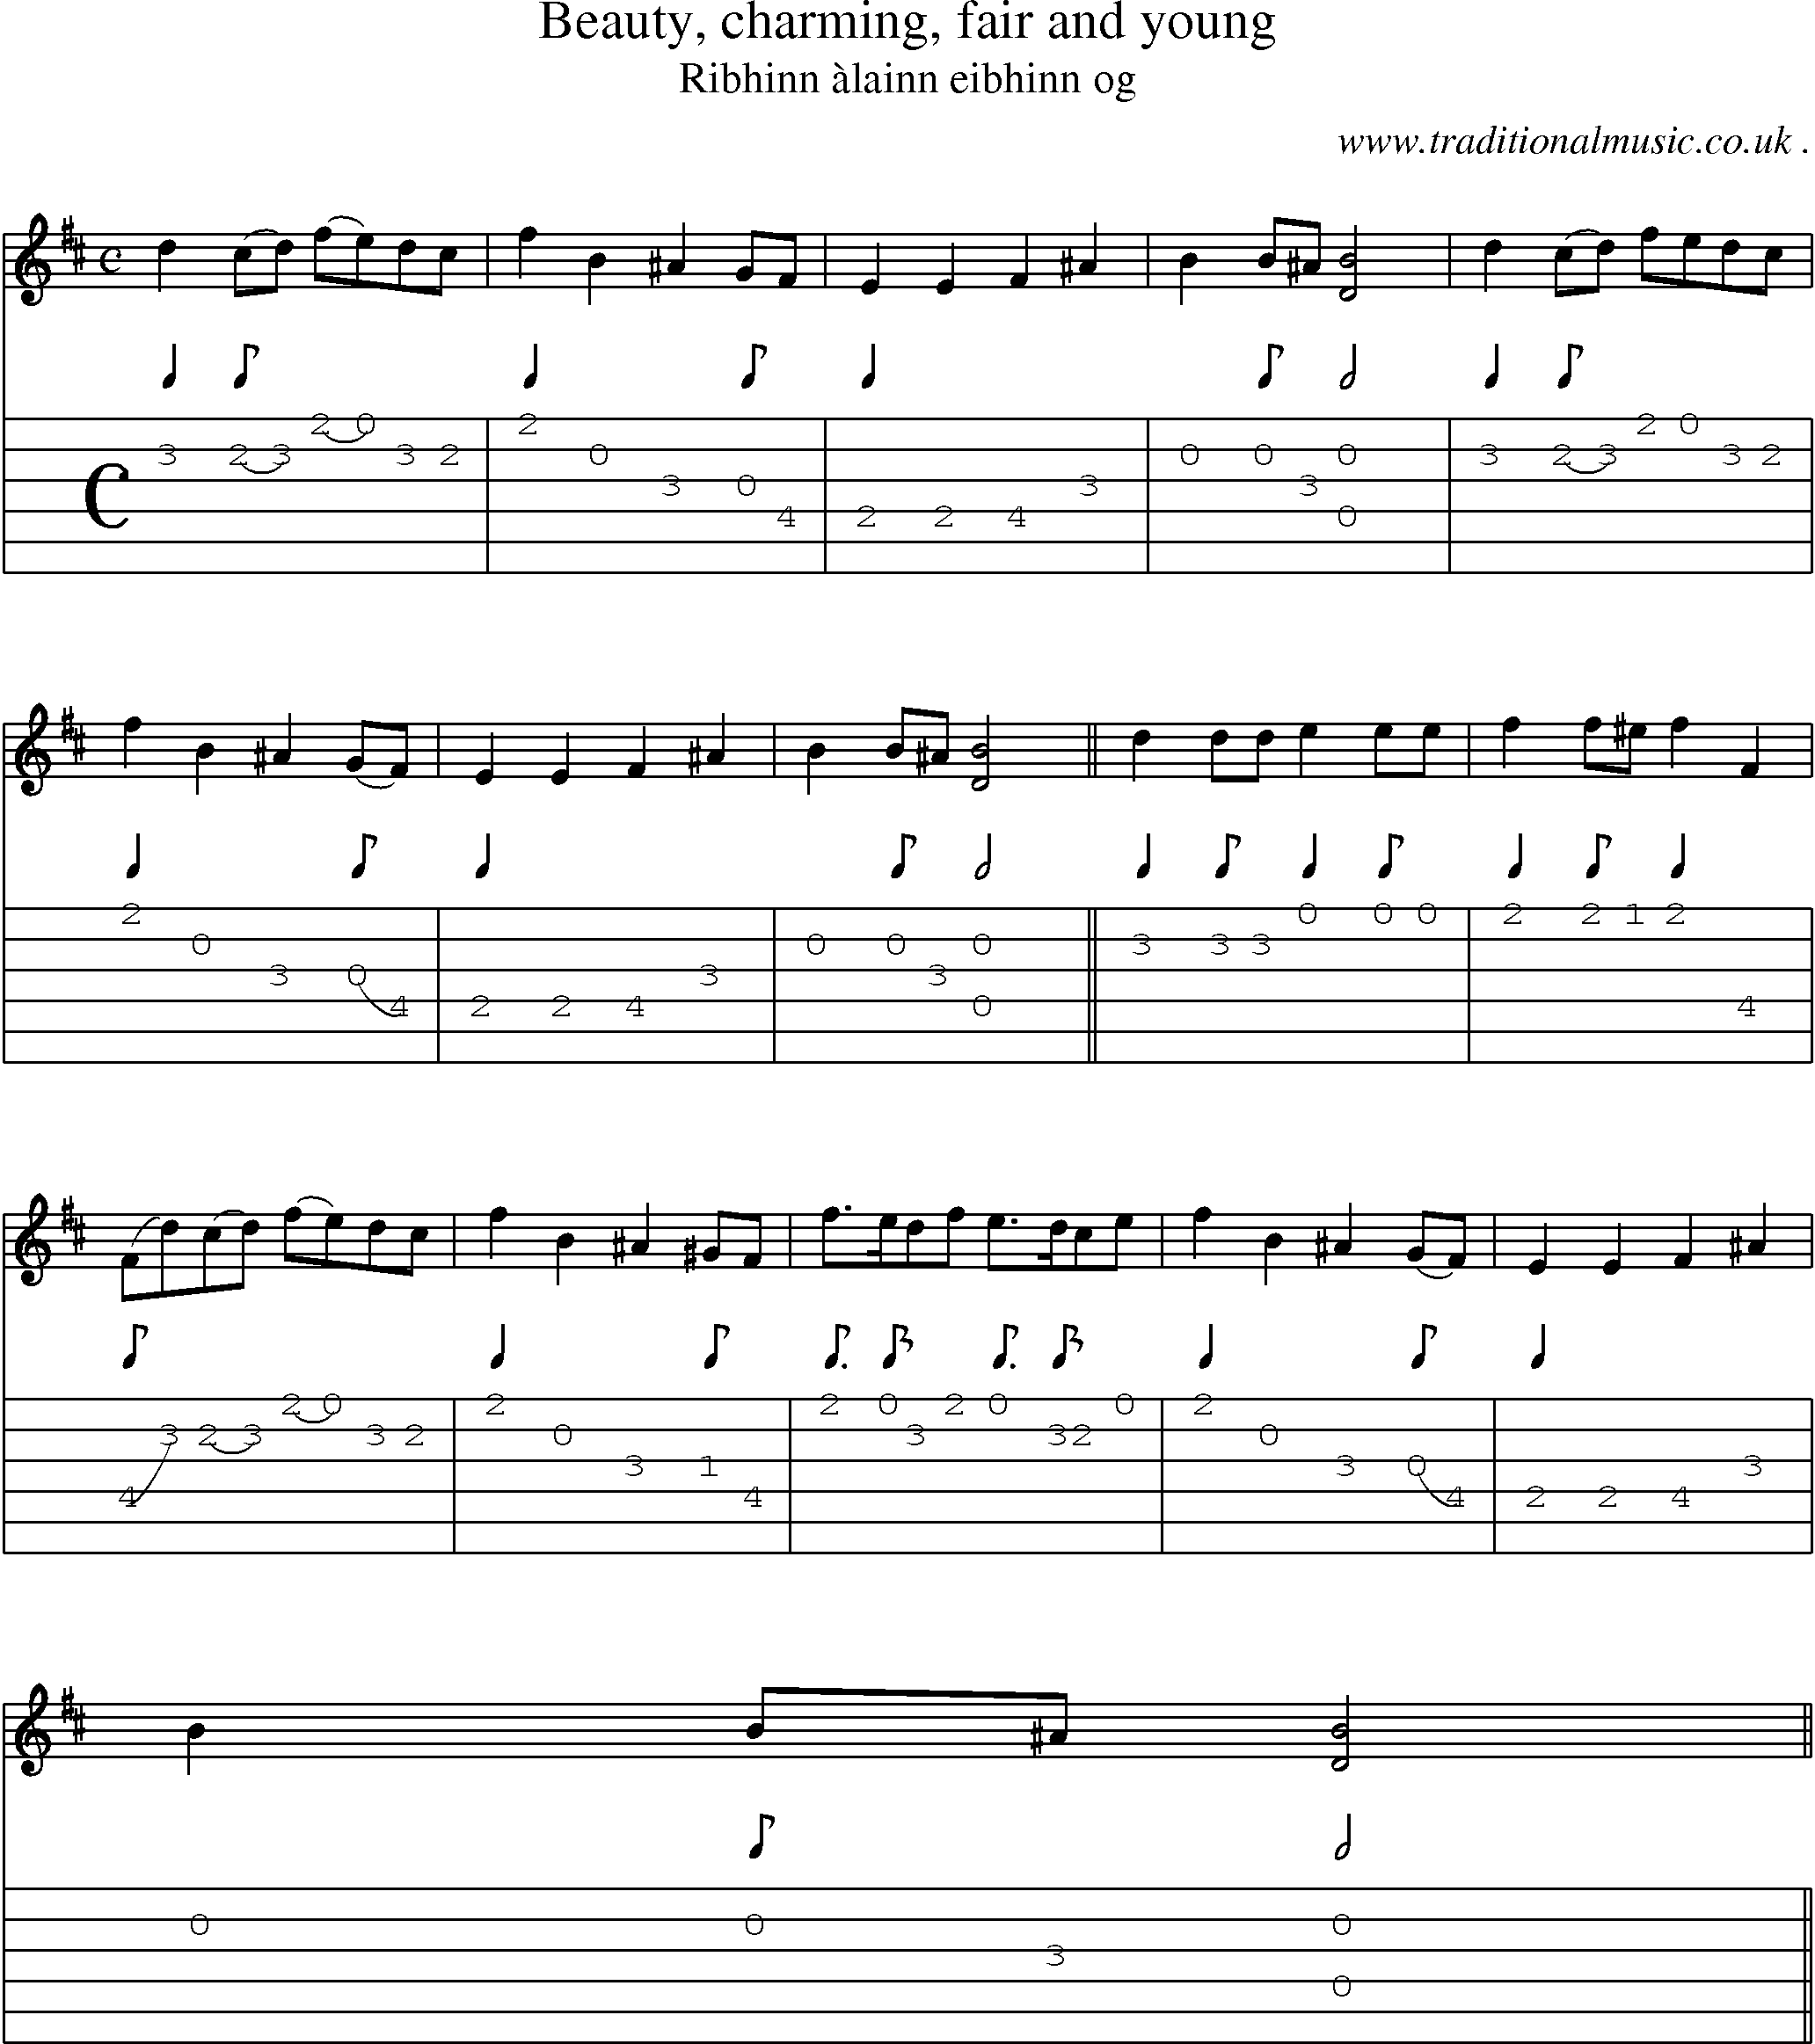 Sheet-music  score, Chords and Guitar Tabs for Beauty Charming Fair And Young